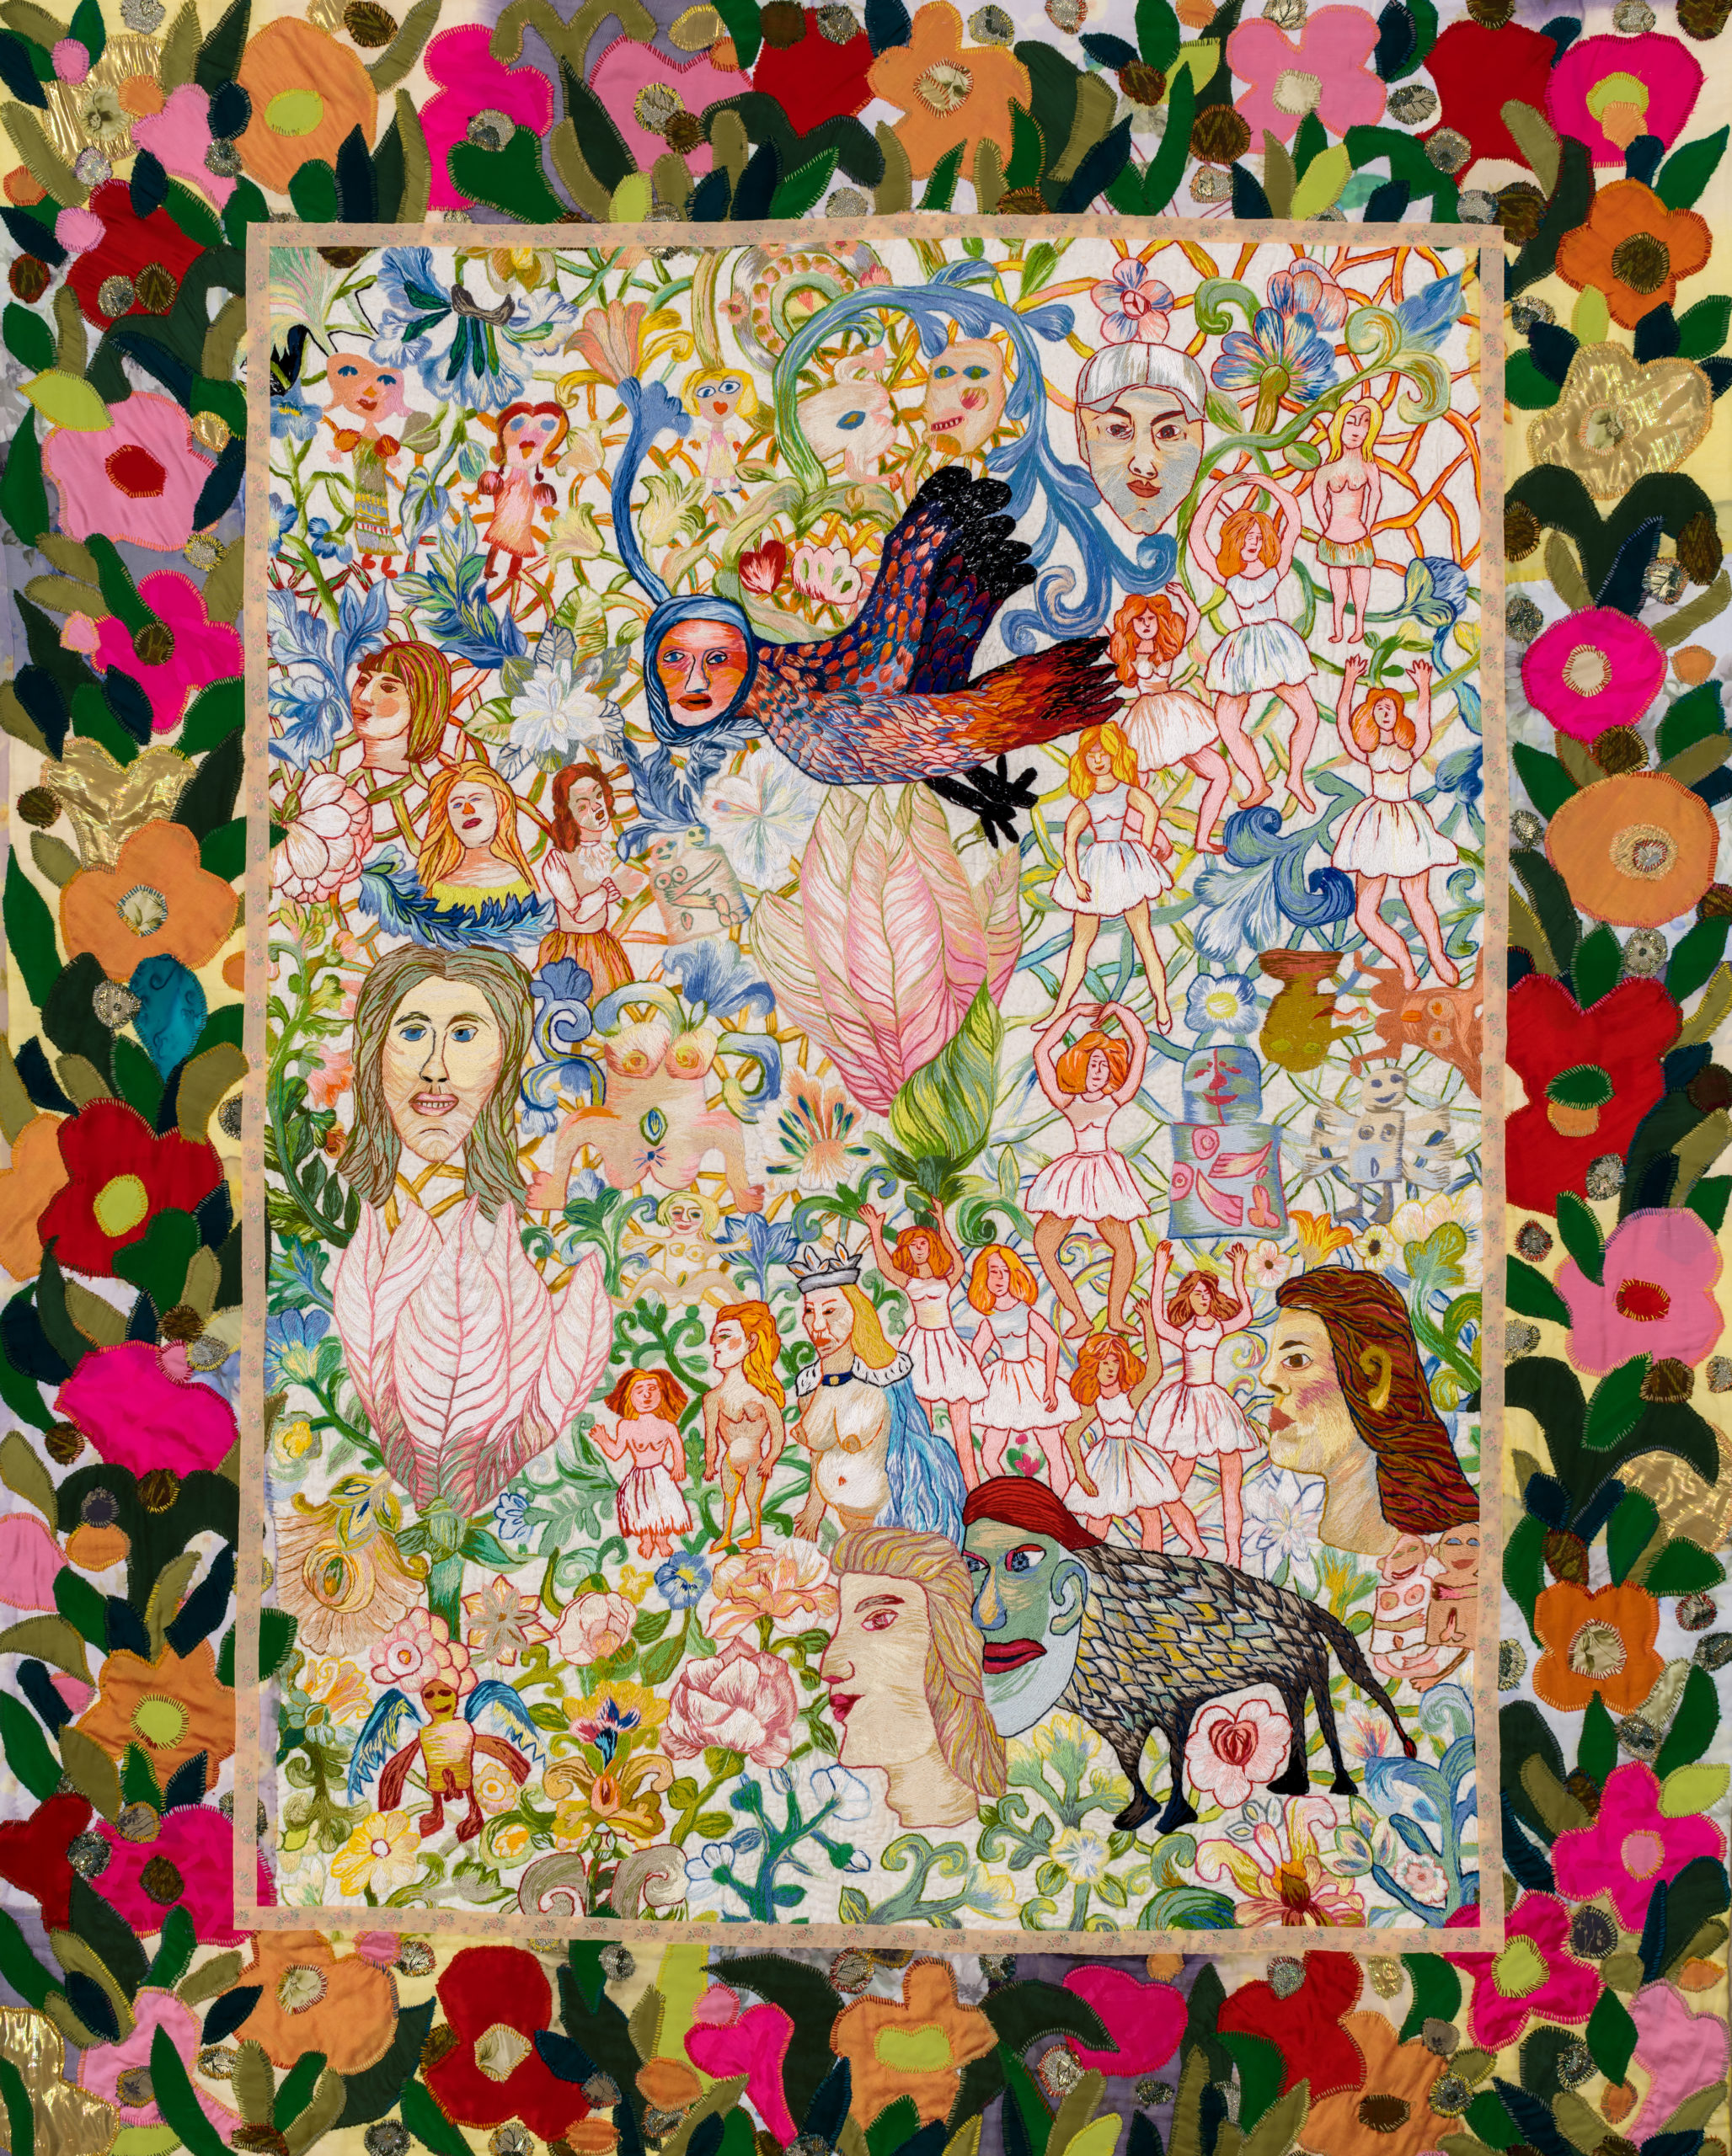 A colourful embroidery by Anna Torma featuring a bird with a human face and other whimsical characters. The main composition is framed by large darker-coloured floral motifs.